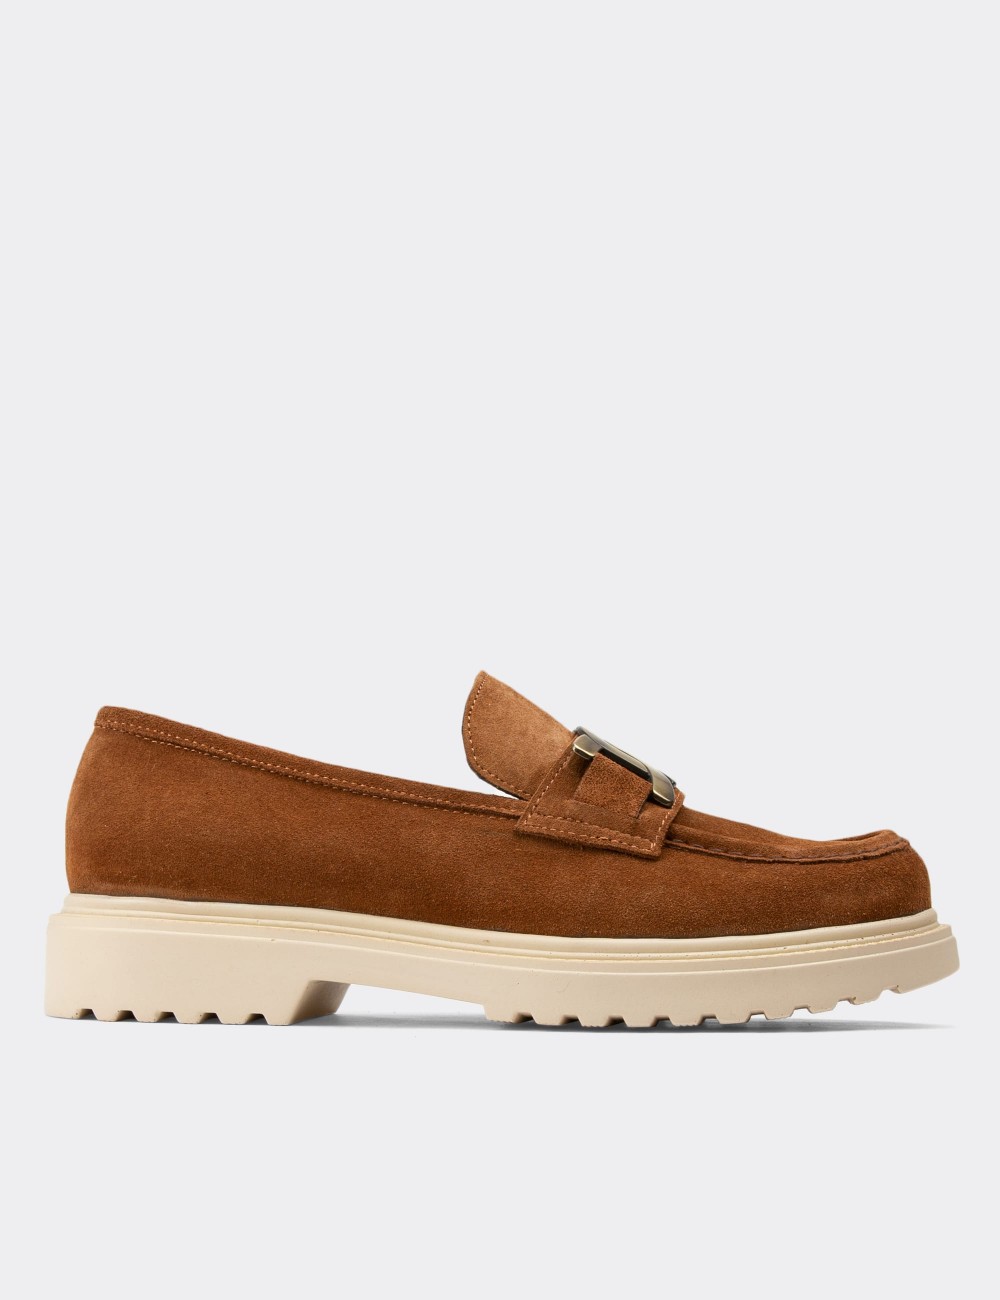 Tan Suede Leather Loafers - 01902ZTBAP01